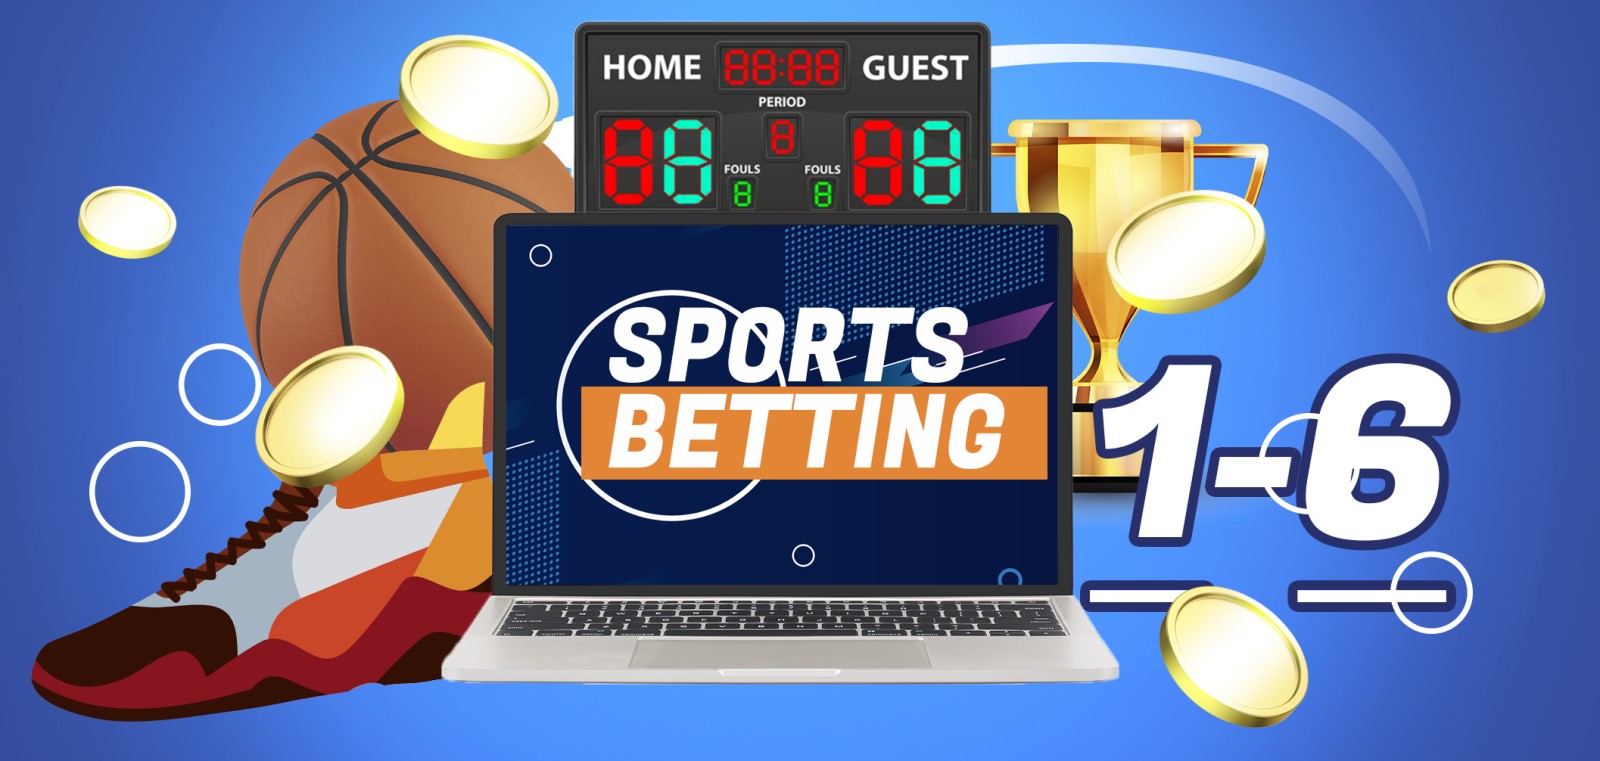 Sports betting is a form of gambling that is staking to sports. The most common and popular sports people are wagering on are basketball, volleyball, soccer, football, horse racing, and more. It also became one of the popular types of gambling worldwide. Although, some countries see it as illegal, still, many countries legalized it as long as they comply to the policies provided by their government.